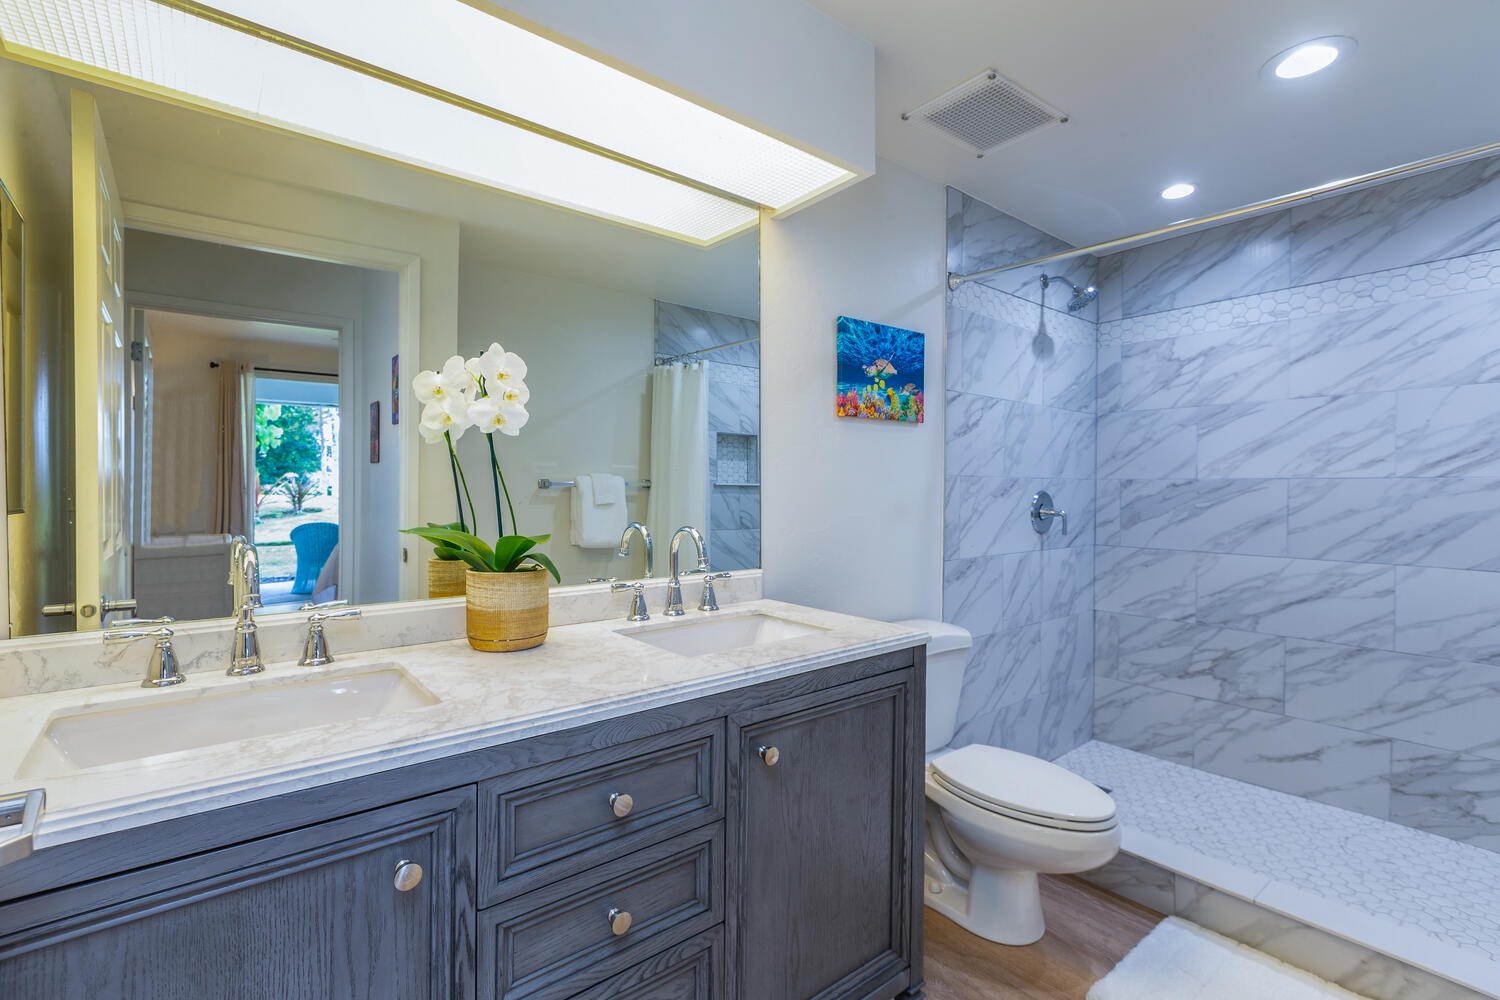 Princeville Vacation Rentals, Emmalani Court 414 - Primary ensuite with dual vanity and walk-in shower